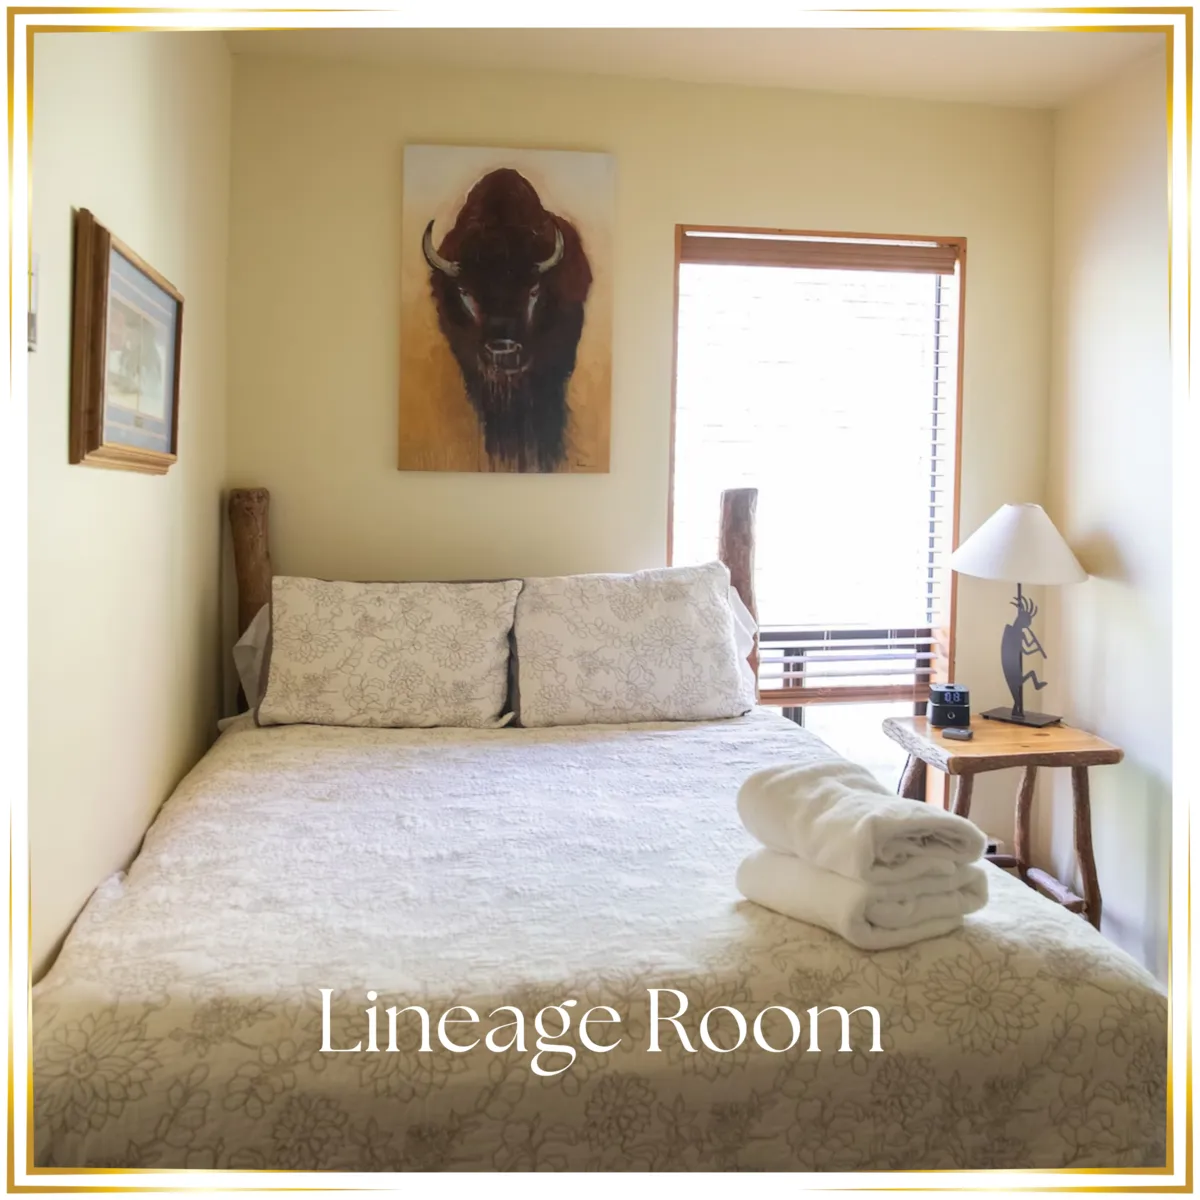 Lineage Room - Shared Room